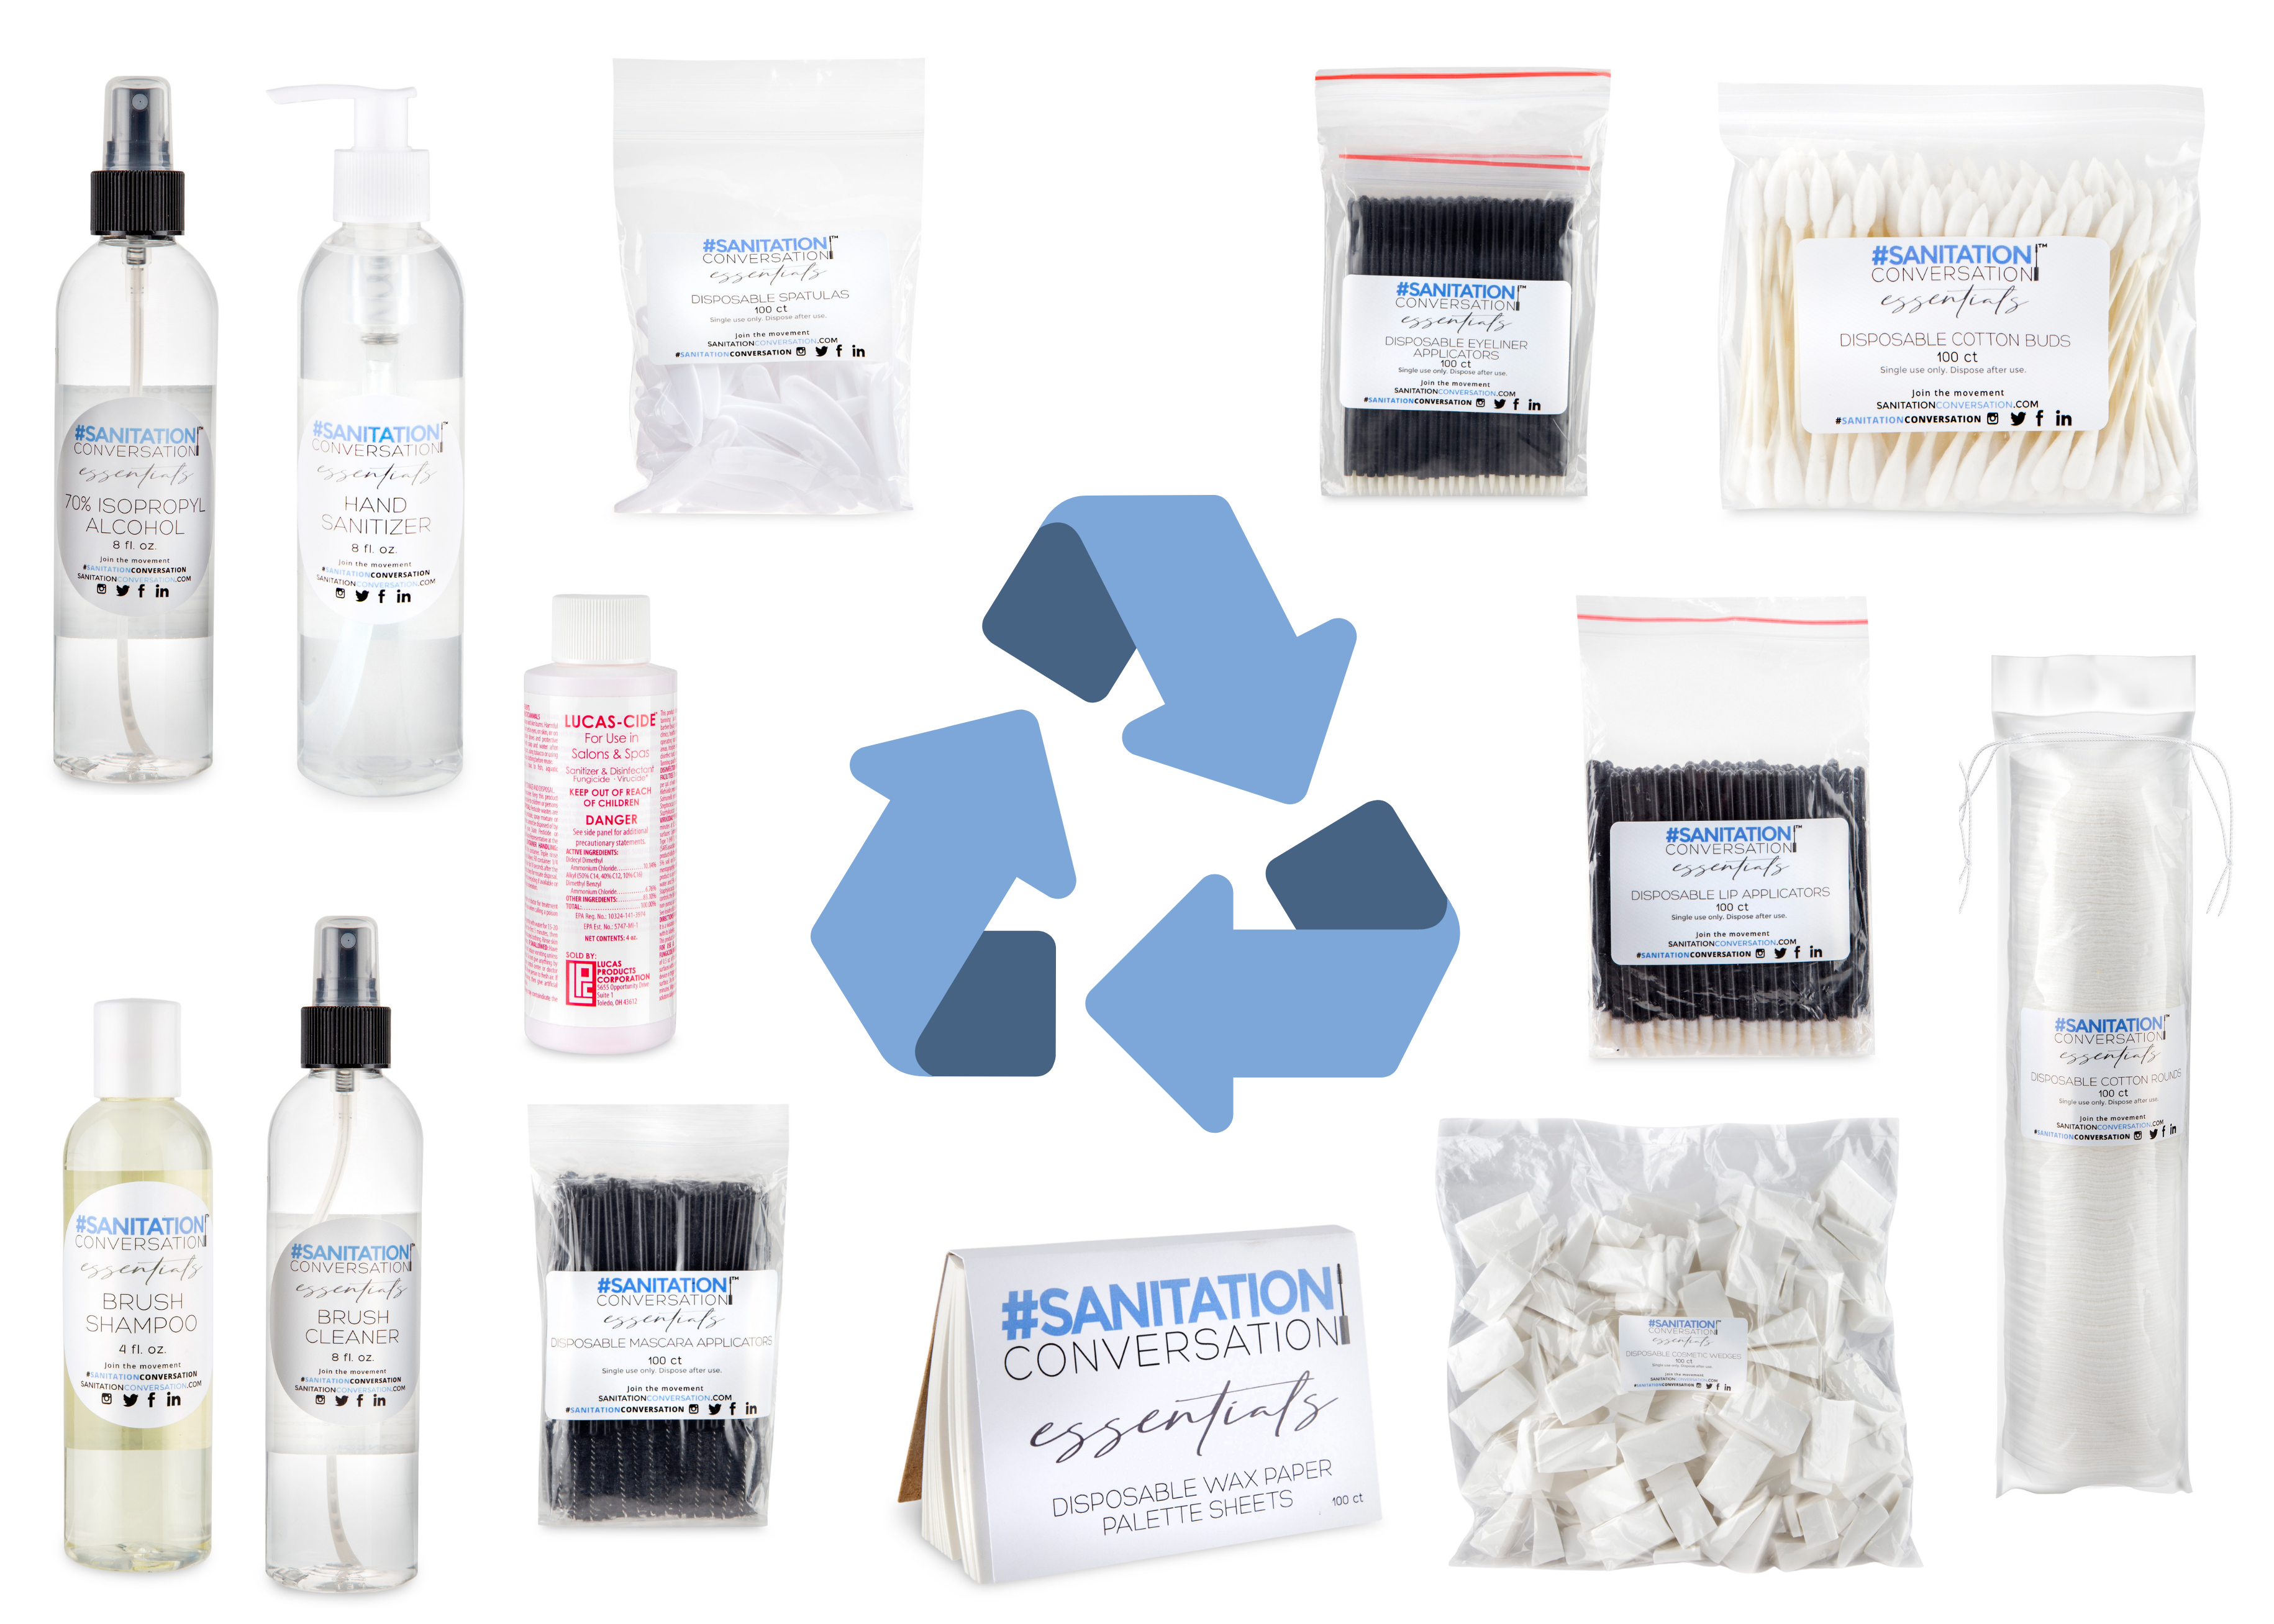 Sanitation Conversation™ Partners with TerraCycle